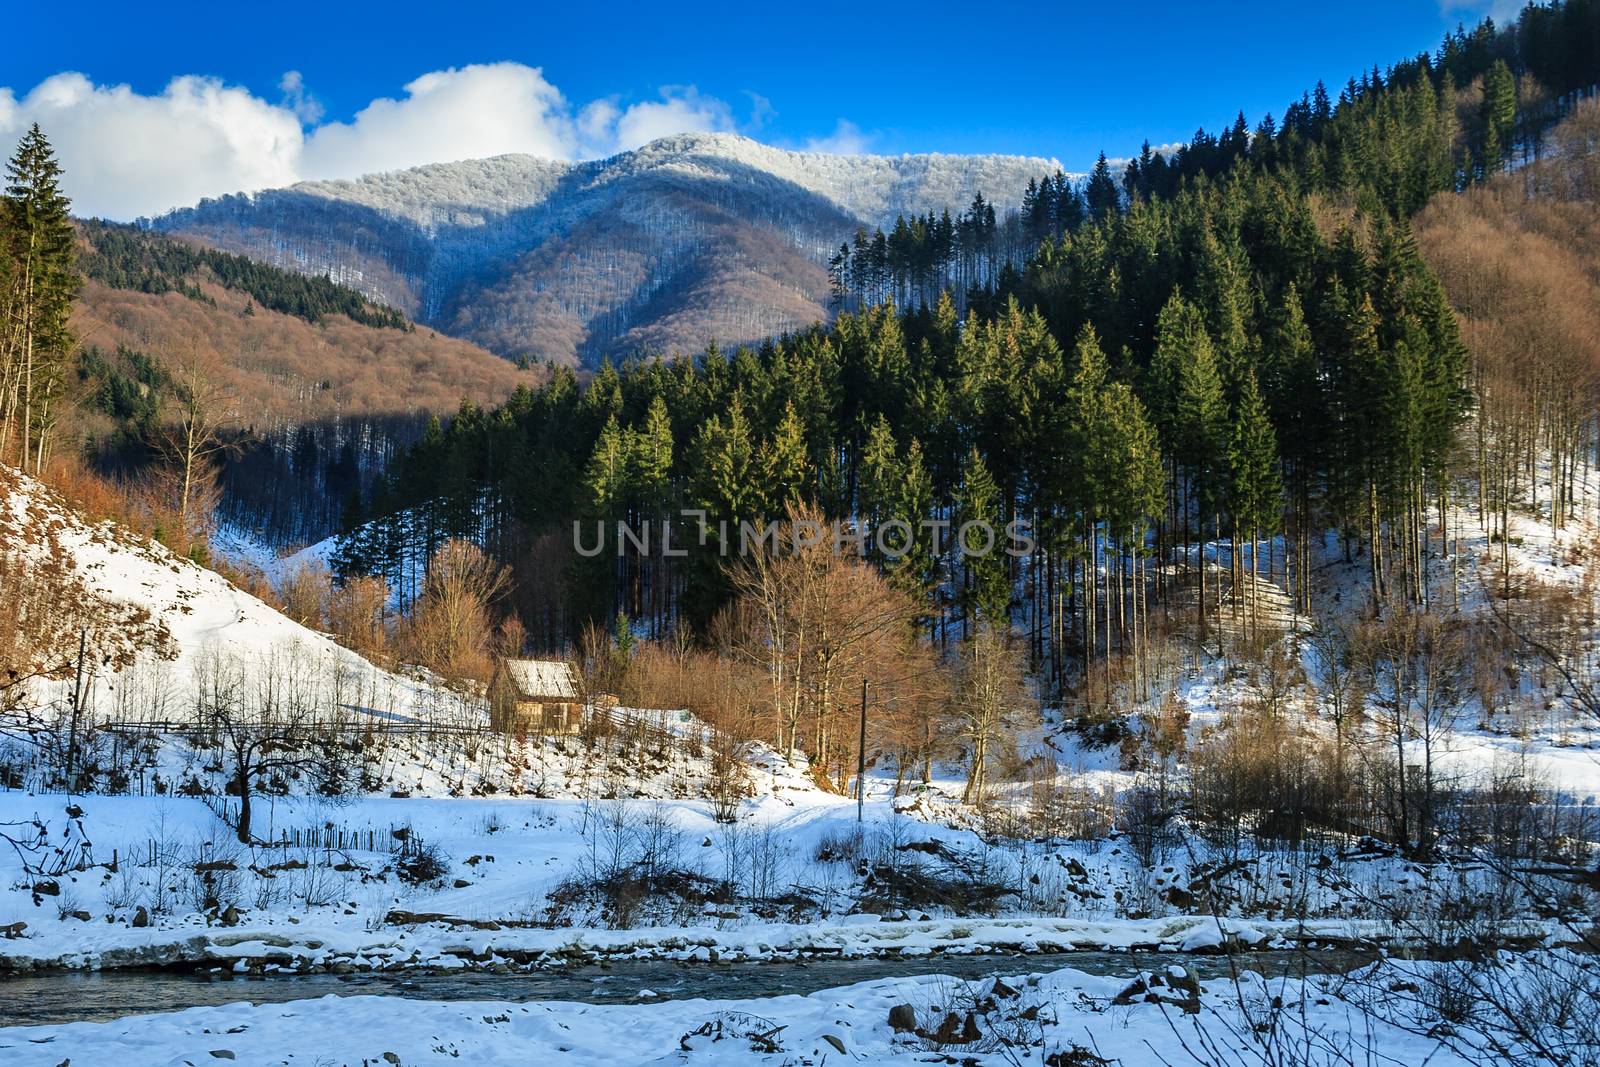 coniferous forest on the snowy mountain peaks near the river in winter day